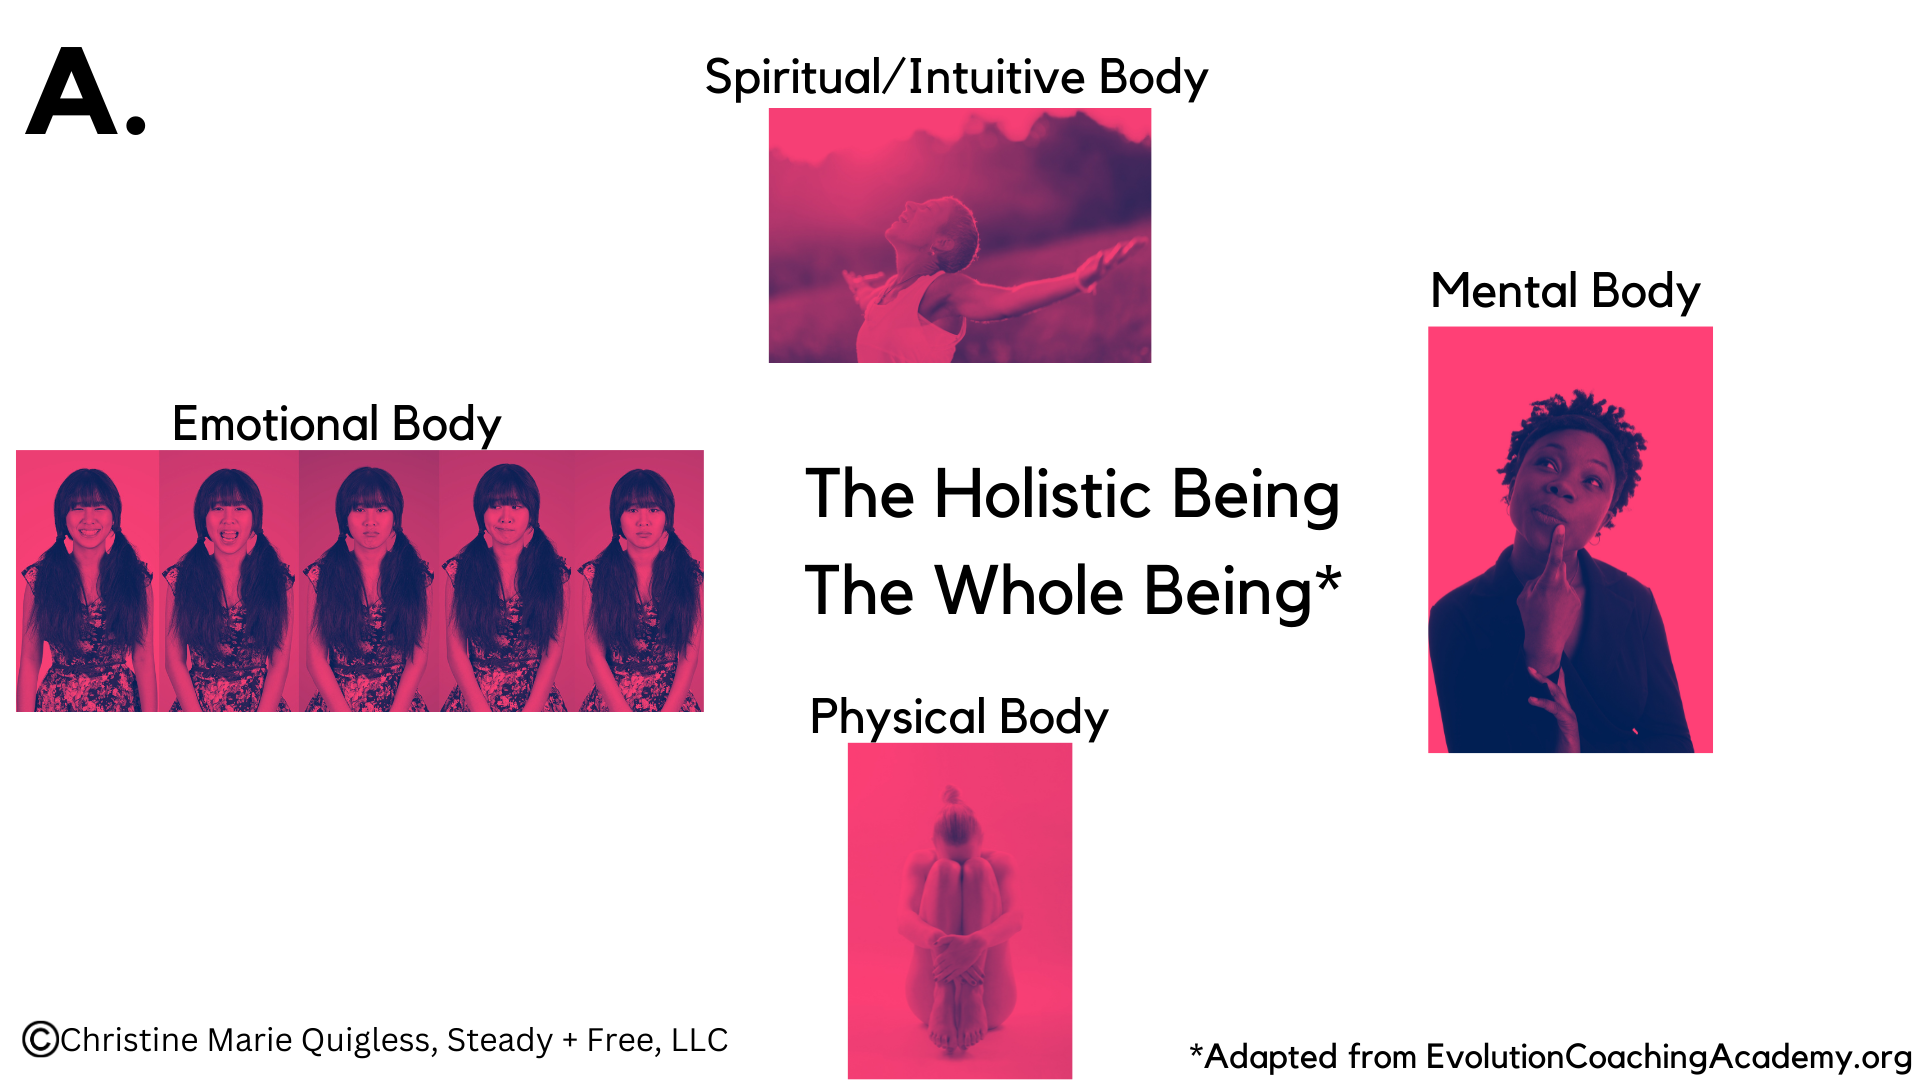 Item A. The Holistic Being